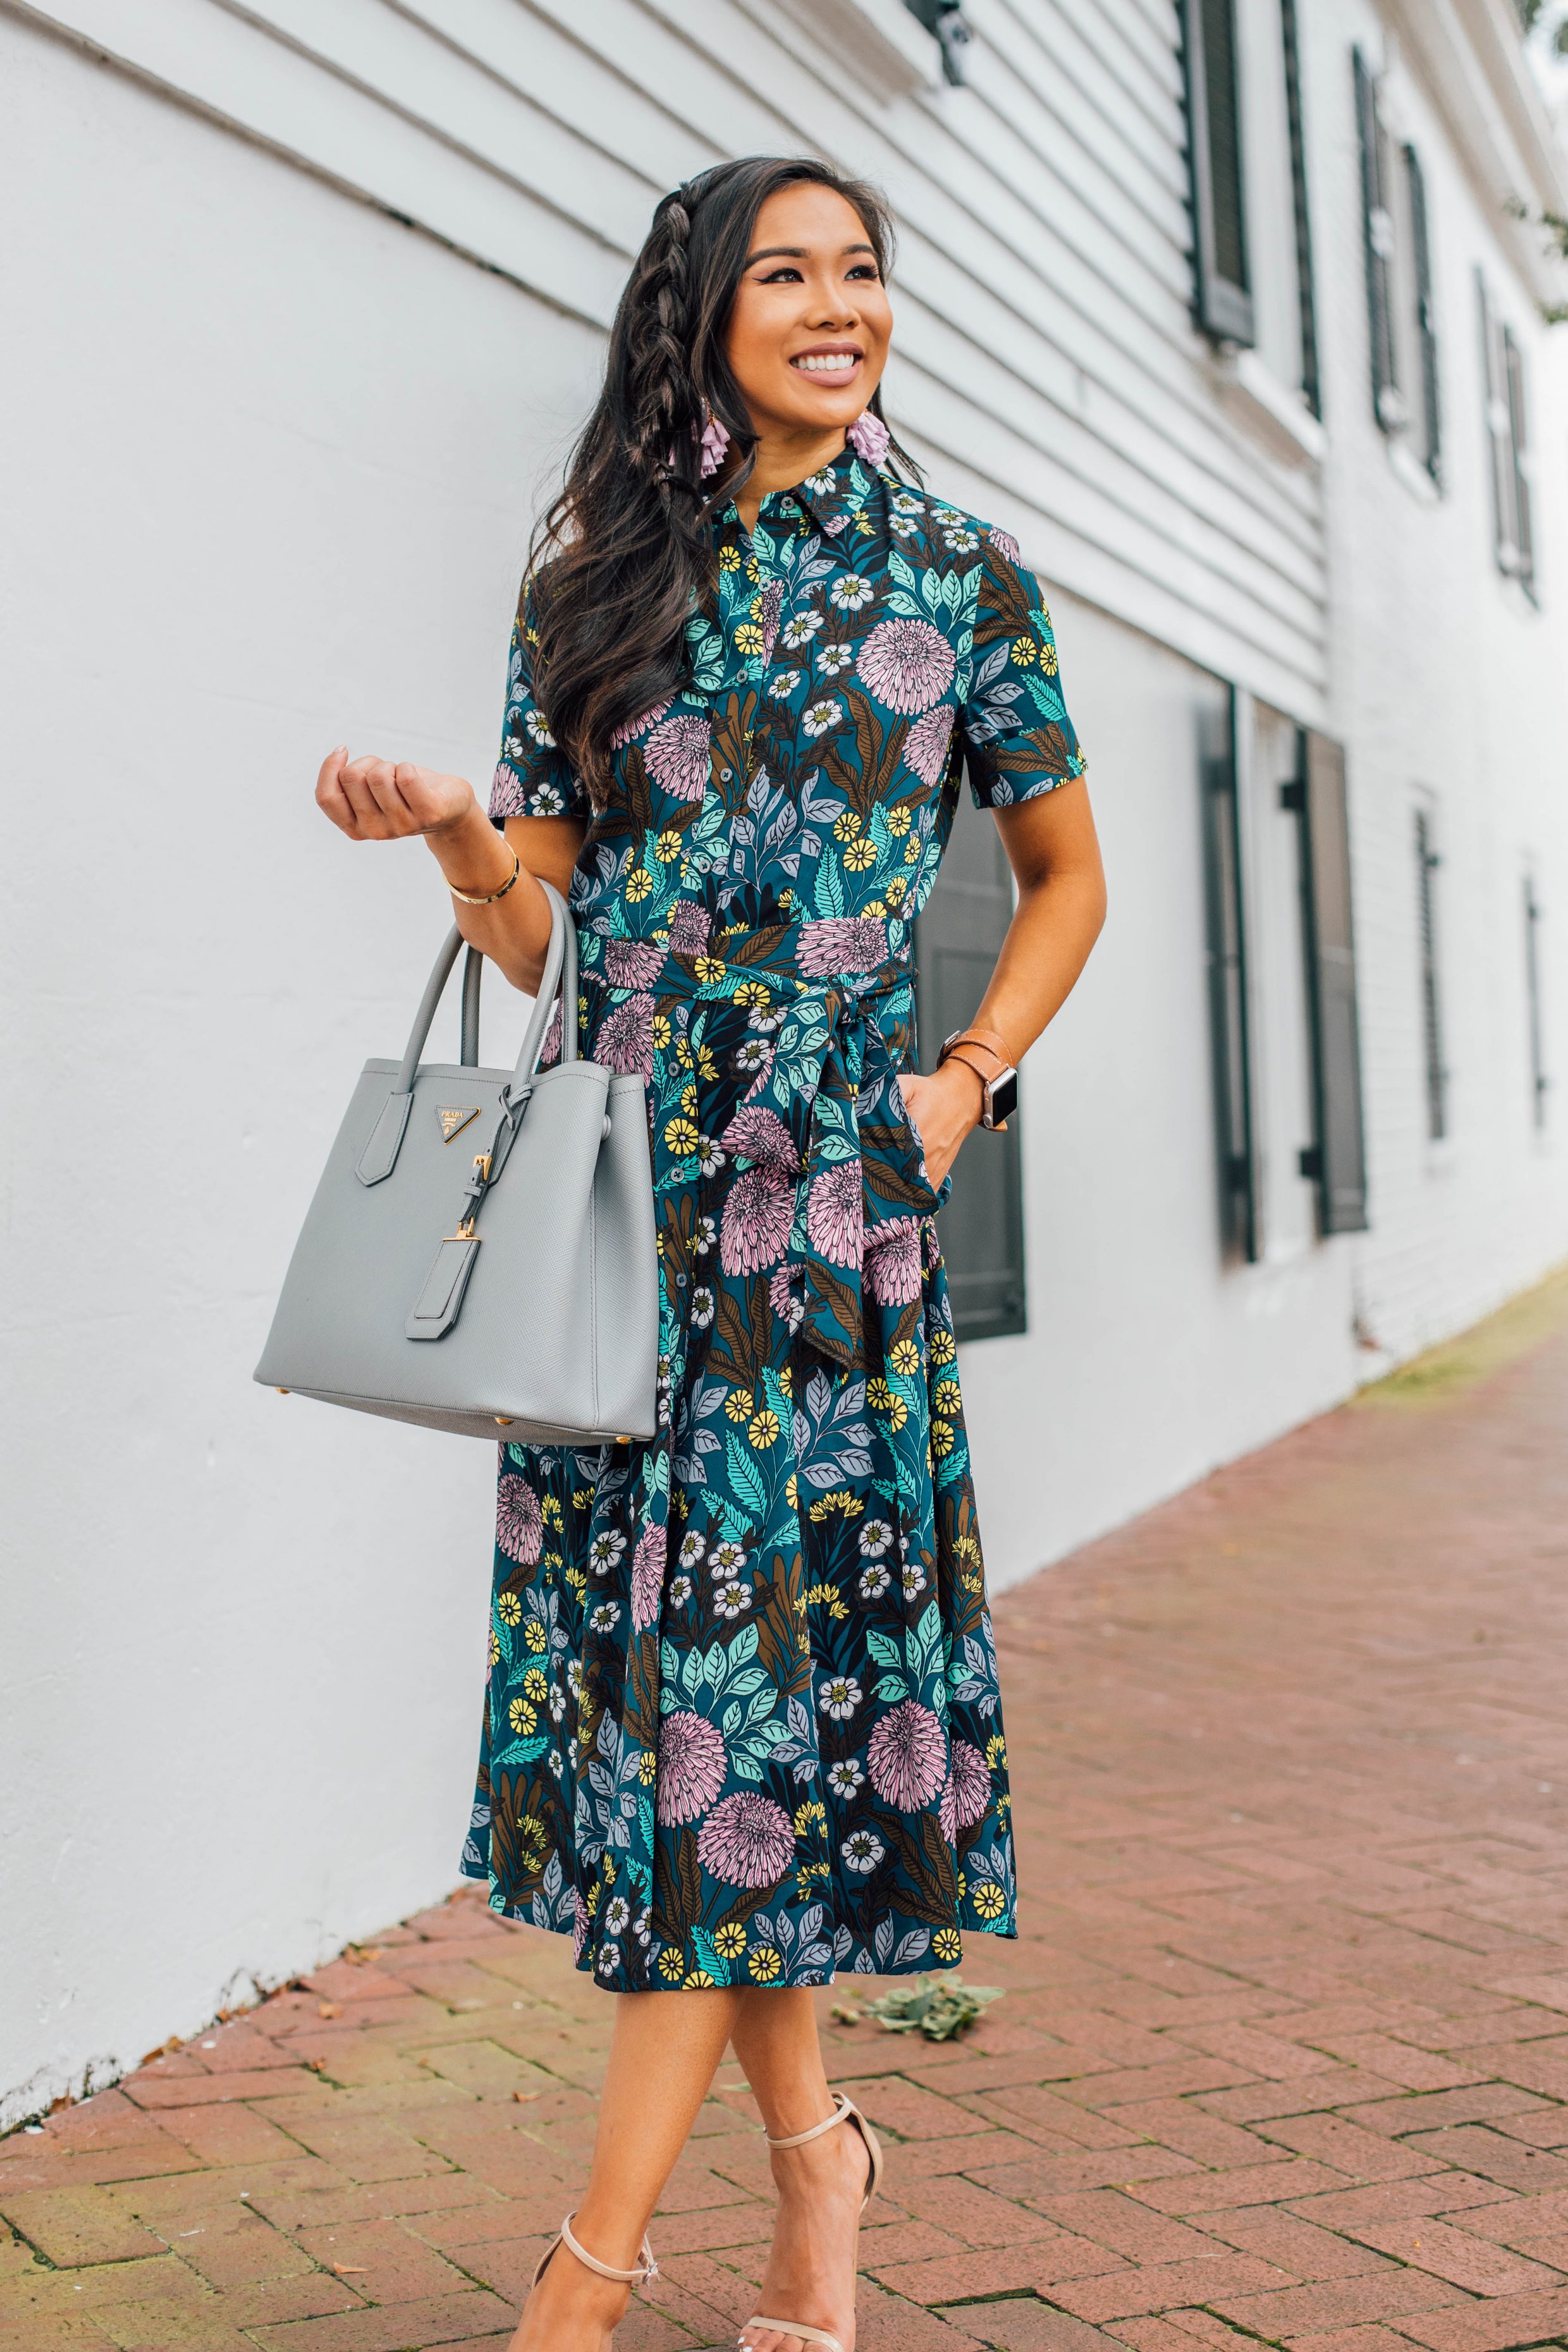 Blogger Hoang-Kim wears a floral transition dress for summer into fall